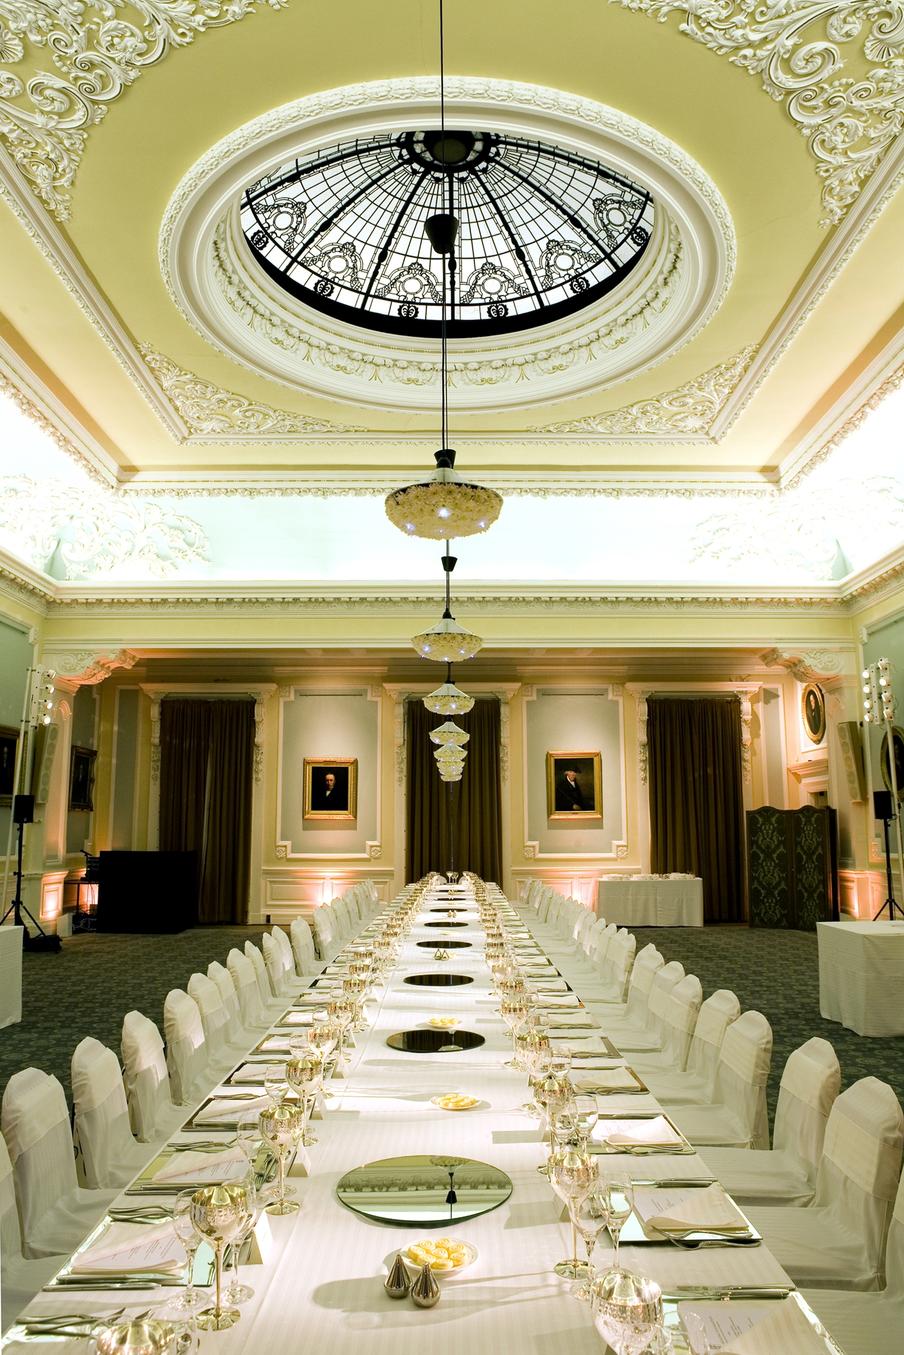 Long banqueting table set for dinner within a Georgian Period room with portraits set in gold gilt frames set around the walls.